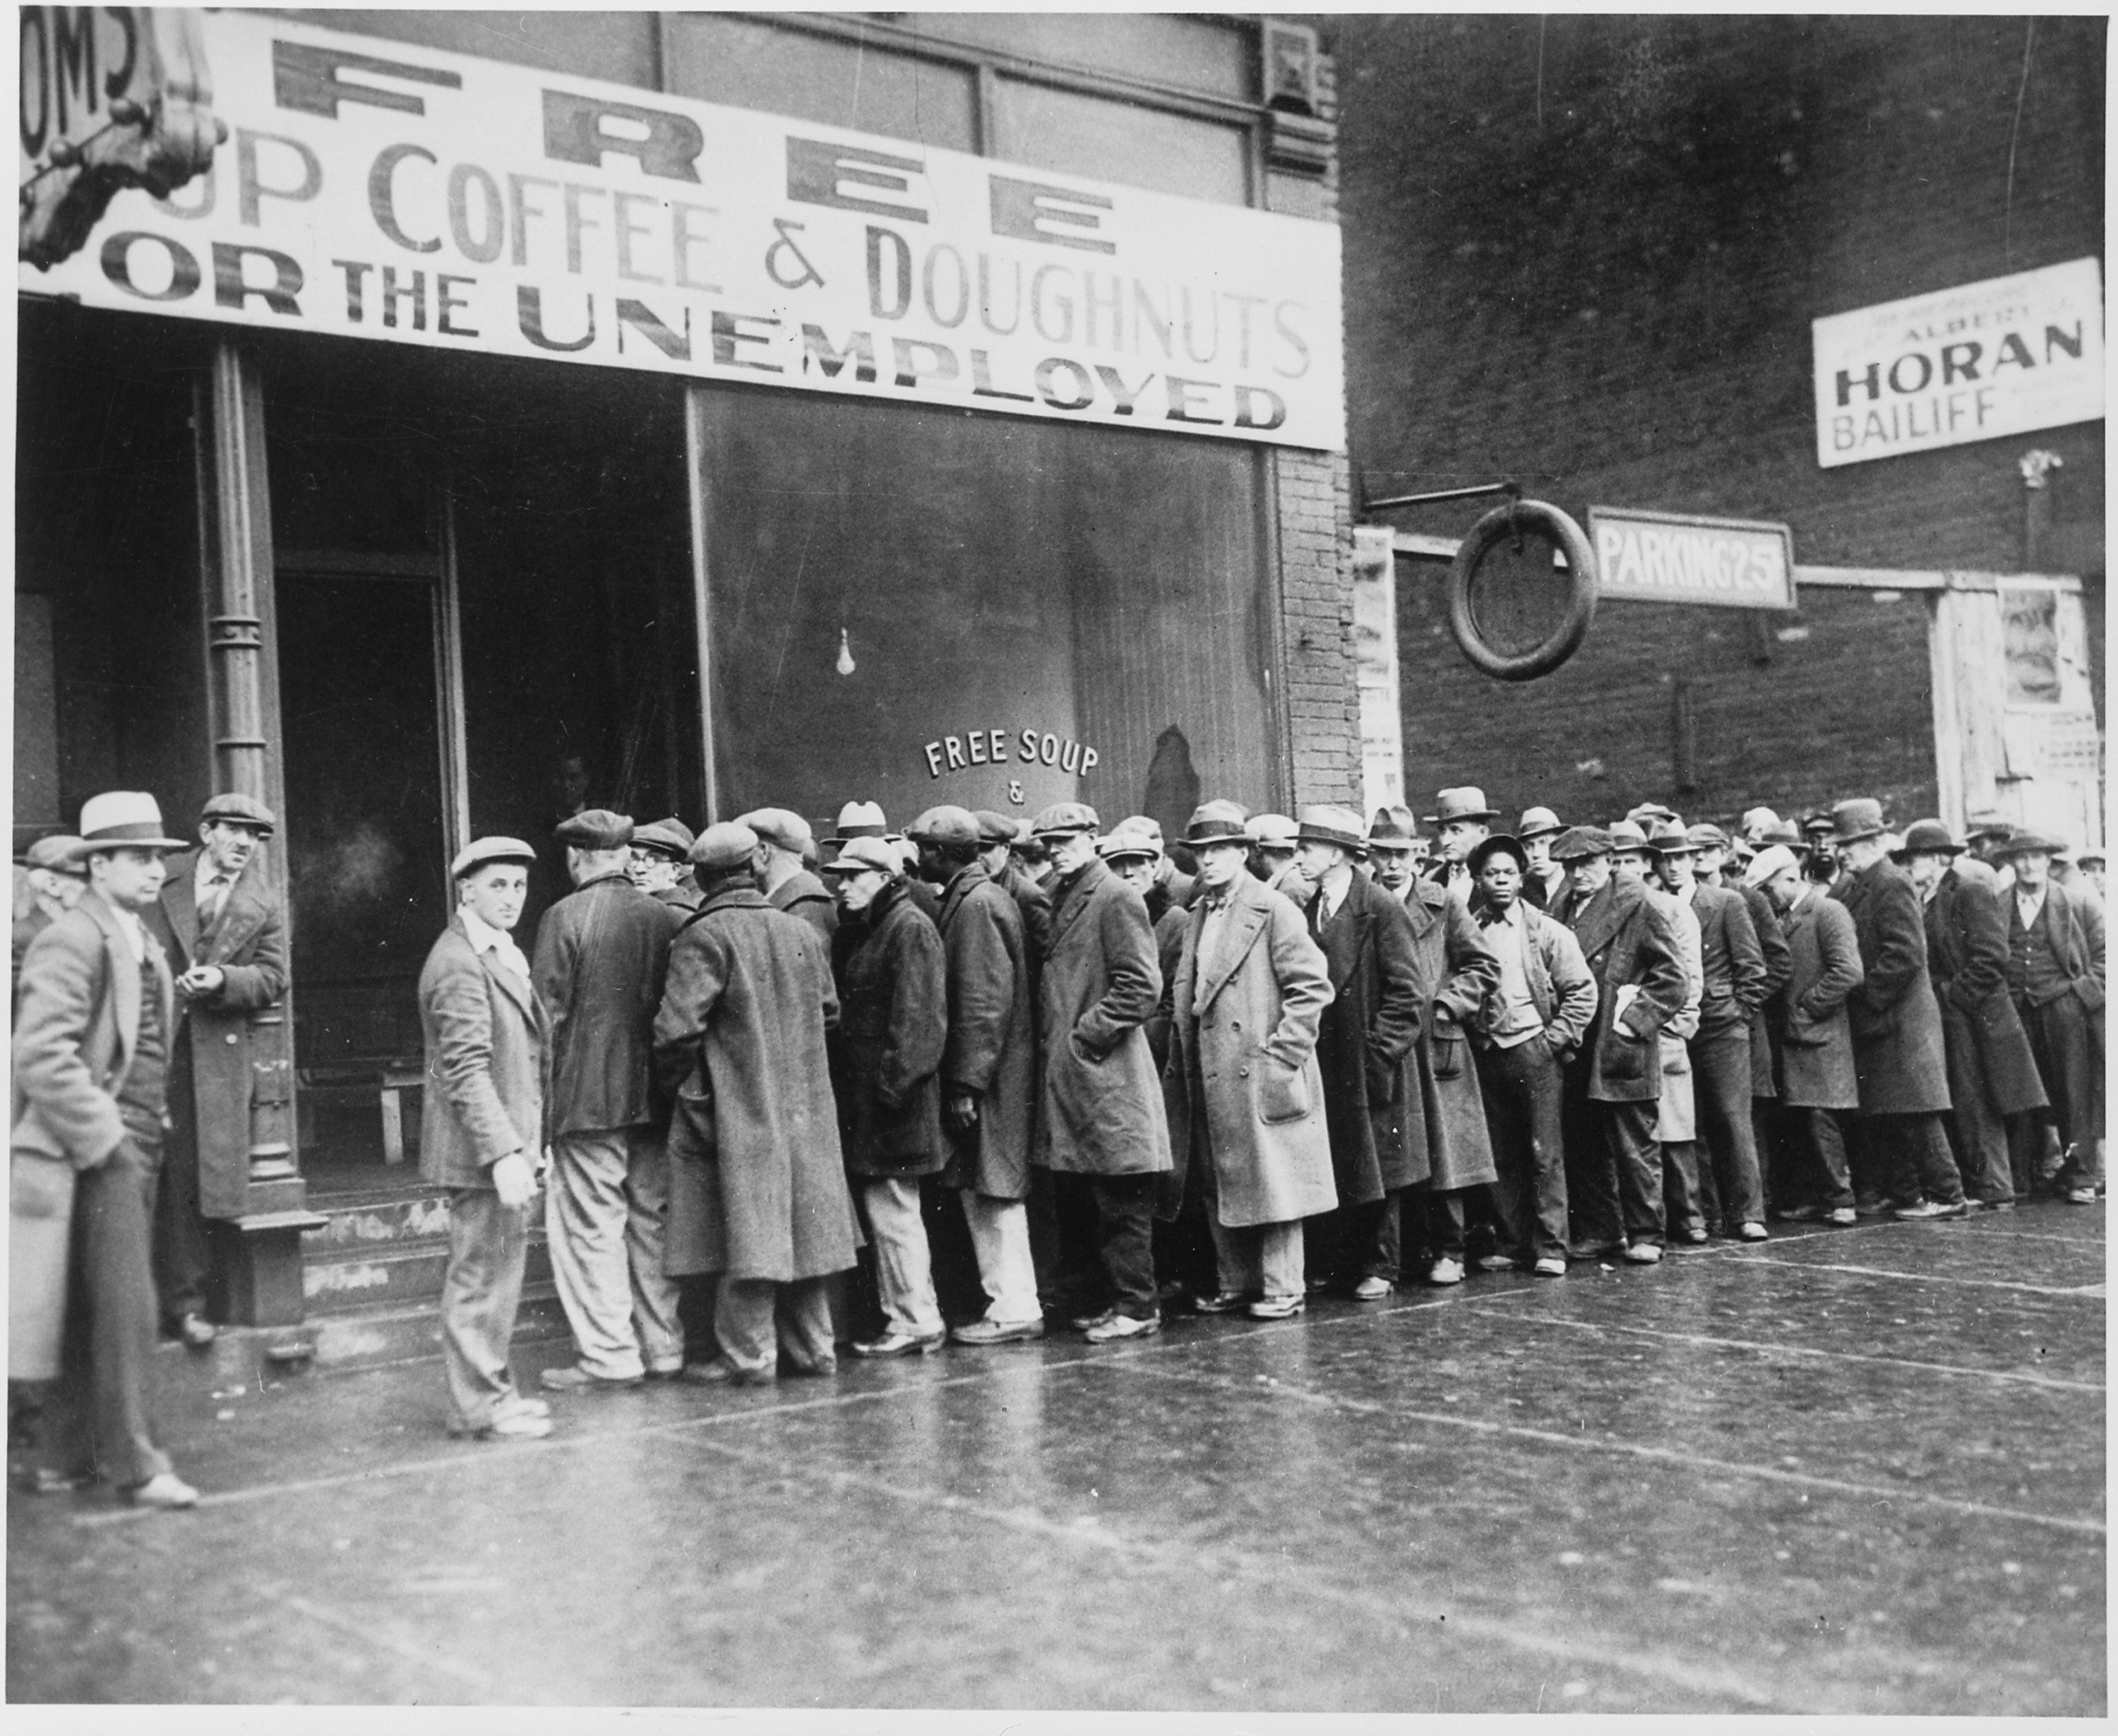 Record Levels of Unemployment Foreshadow Difficult Economic Times